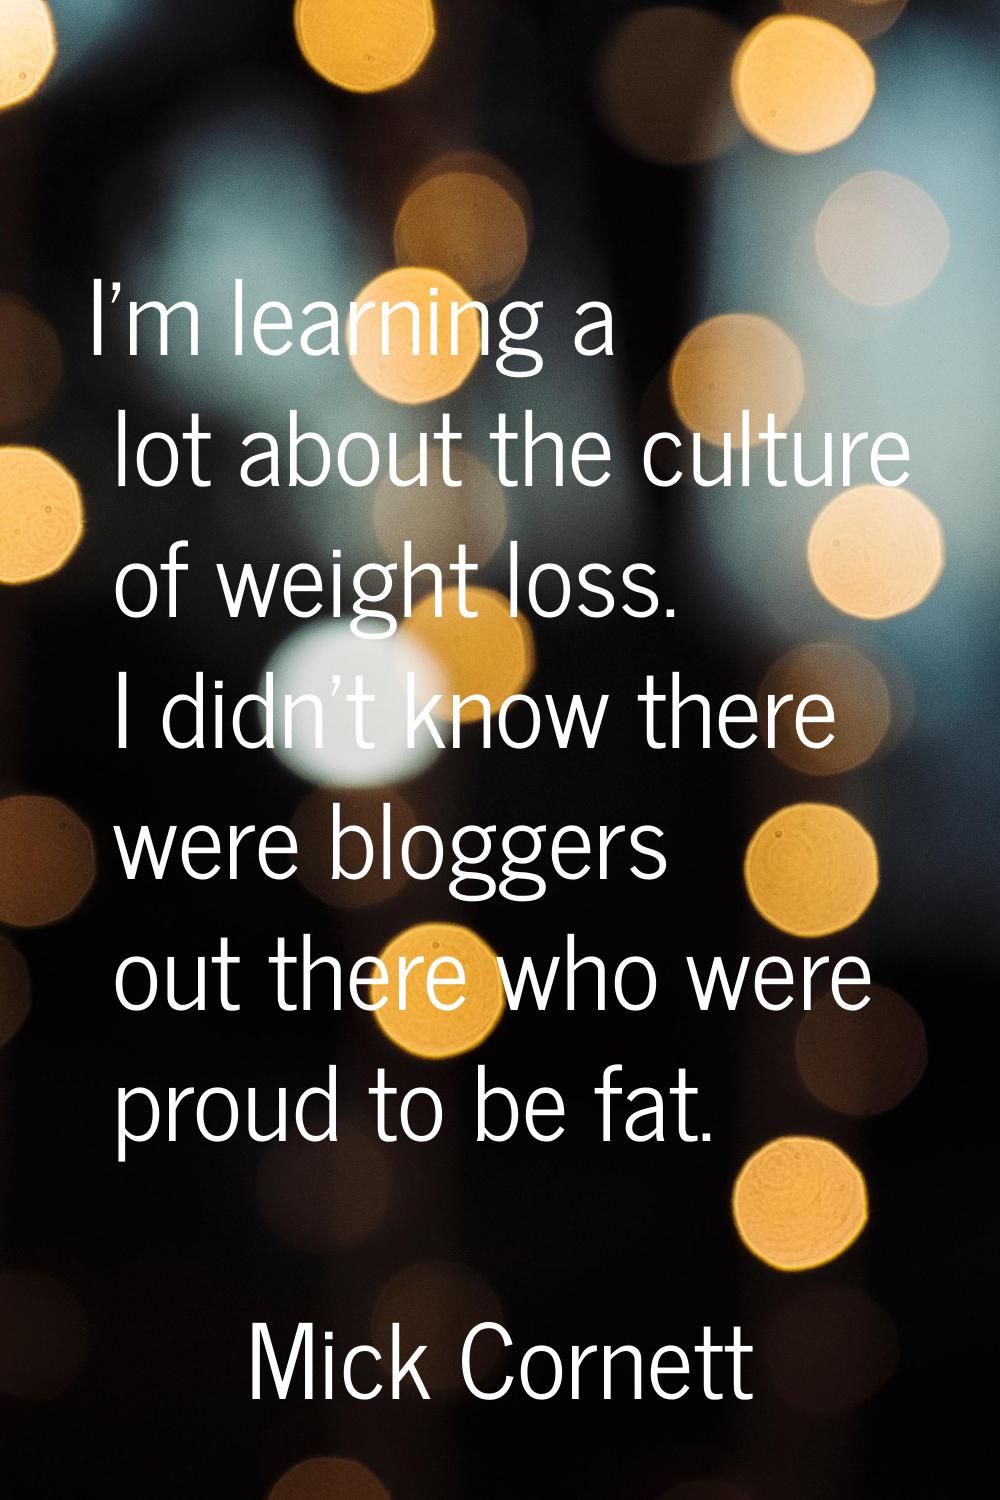 I'm learning a lot about the culture of weight loss. I didn't know there were bloggers out there wh